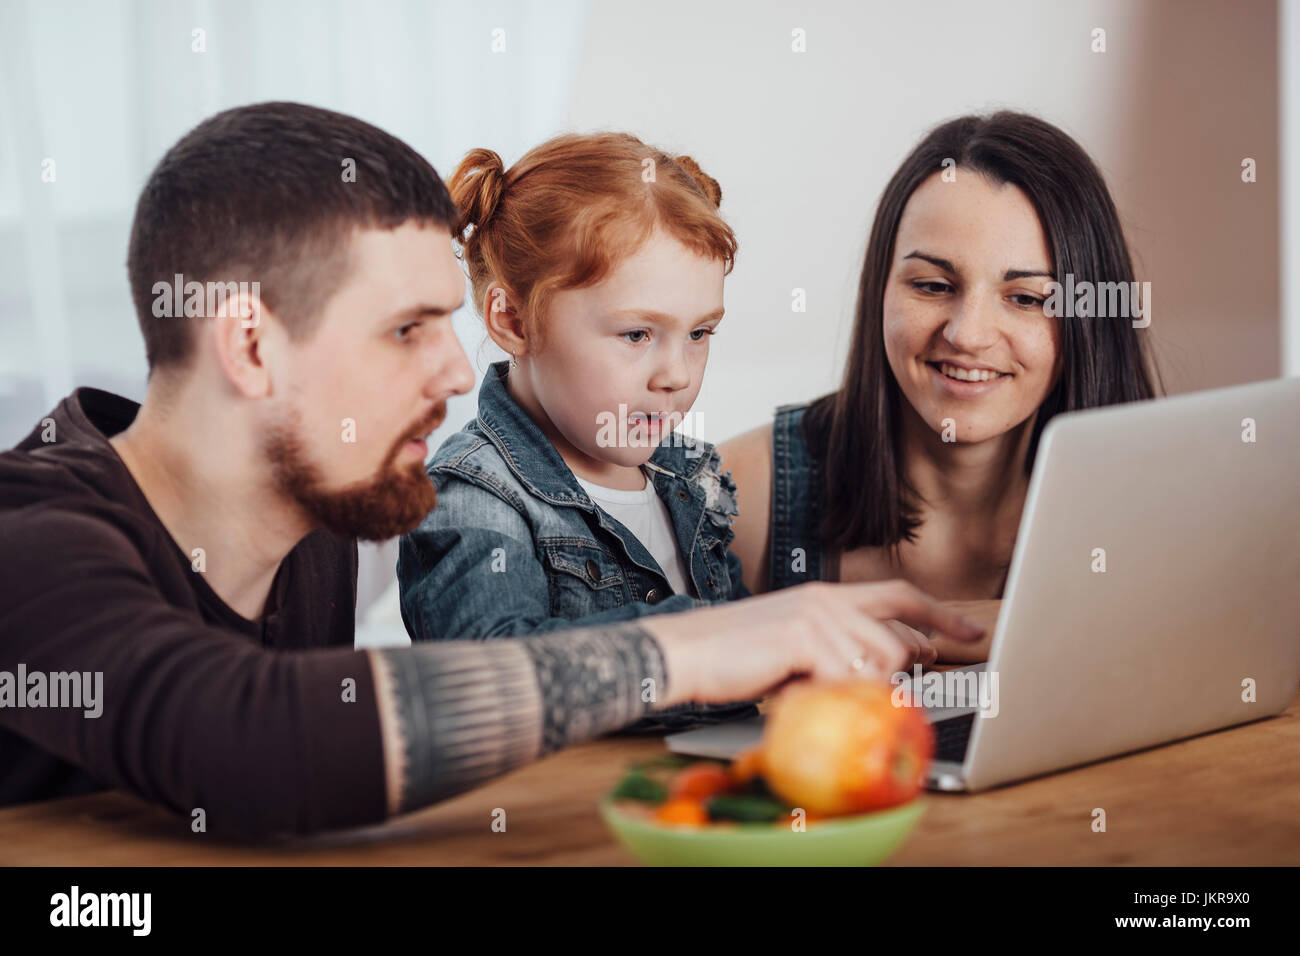 Parents showing laptop to daughter at table in living room Stock Photo